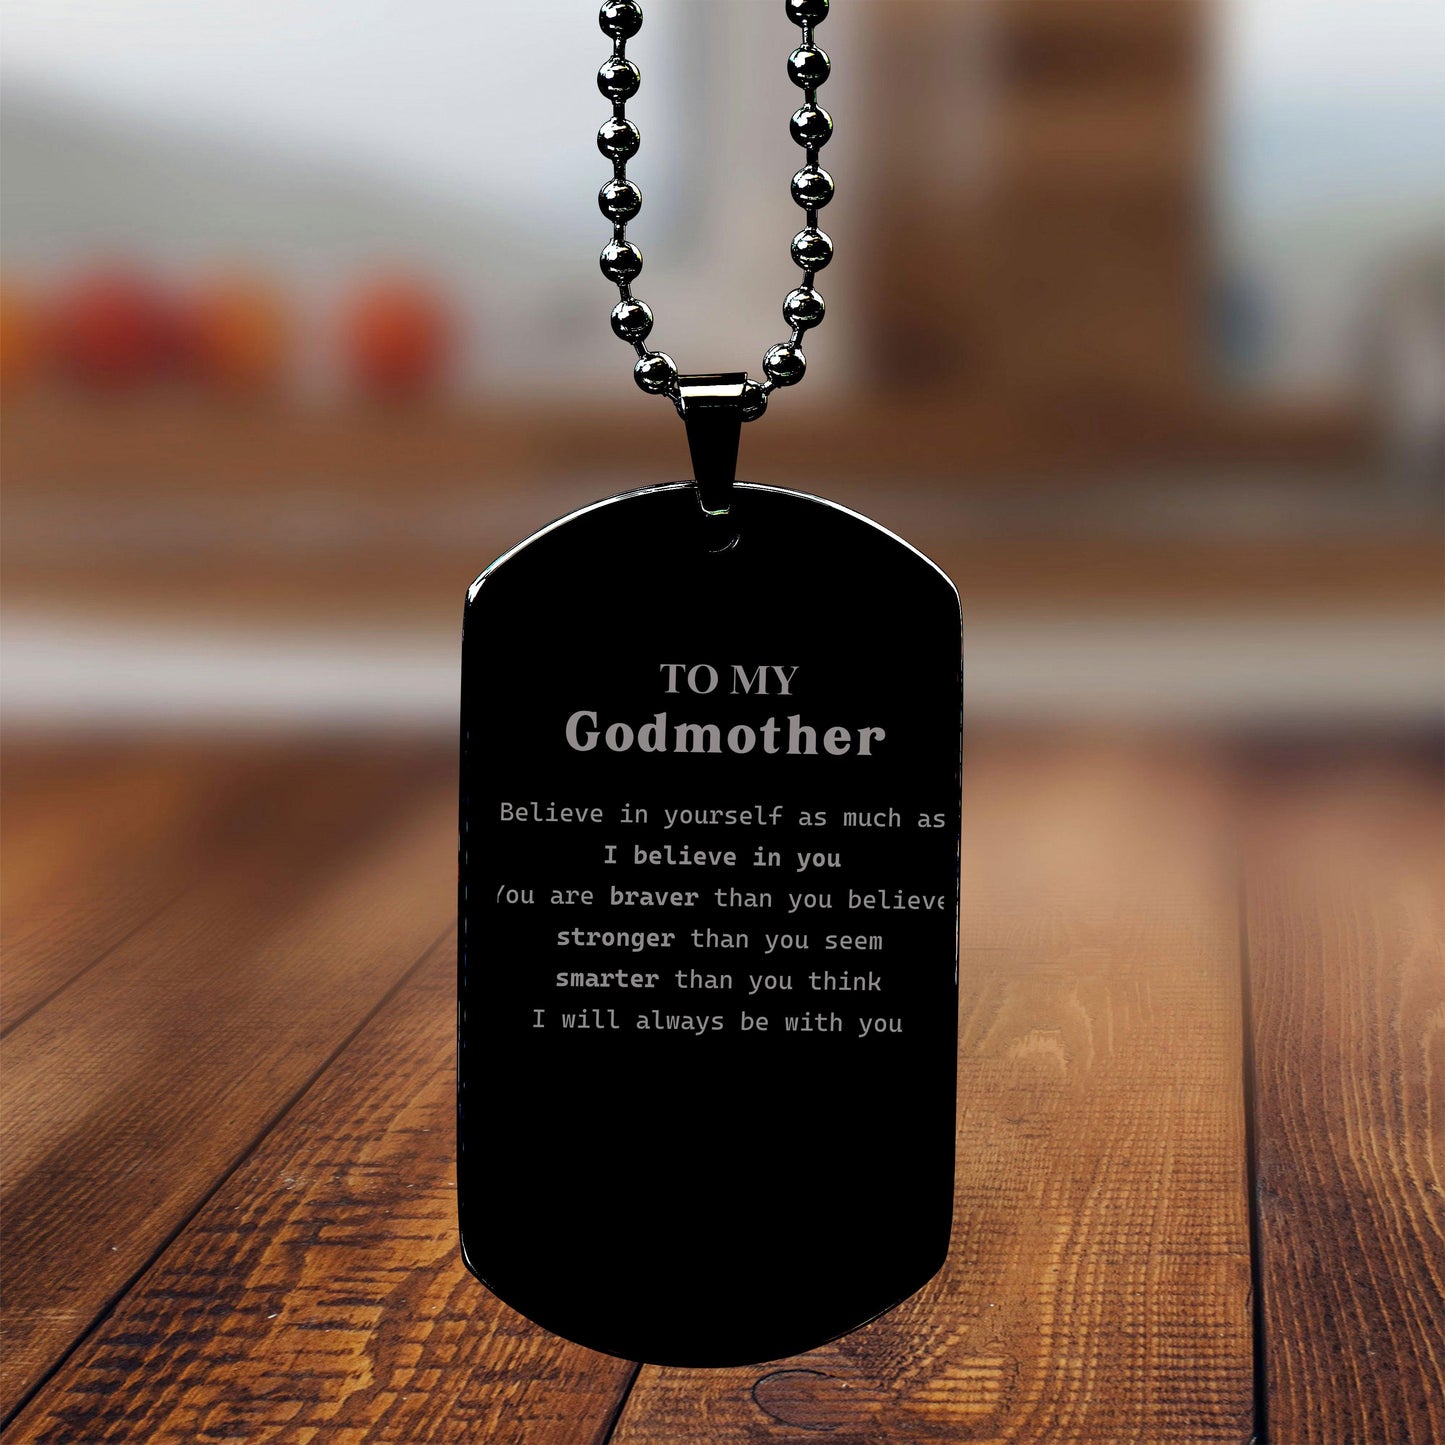 Godmother Black Dog Tag Engraved Necklace - You are braver than you believe, stronger than you seem, Inspirational Birthday Christmas Mother's Day Gifts - Mallard Moon Gift Shop